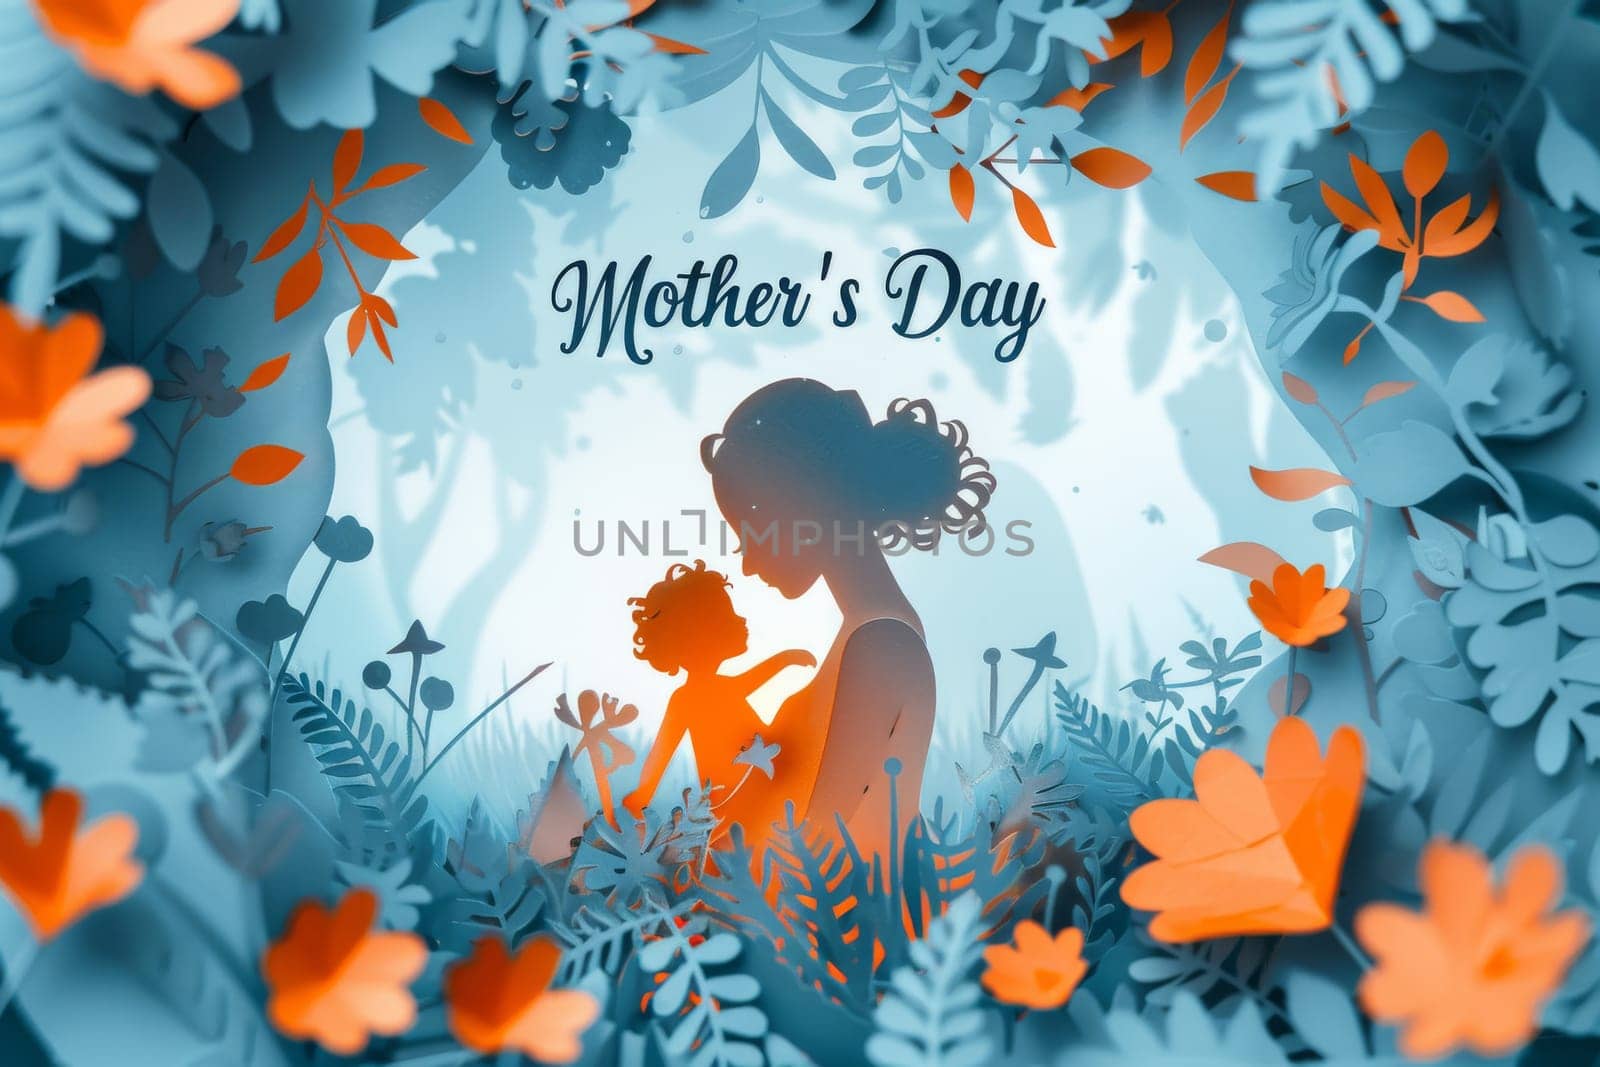 A blue and white Mother's Day card with a woman and child on it. The card is decorated with flowers and has a blue background